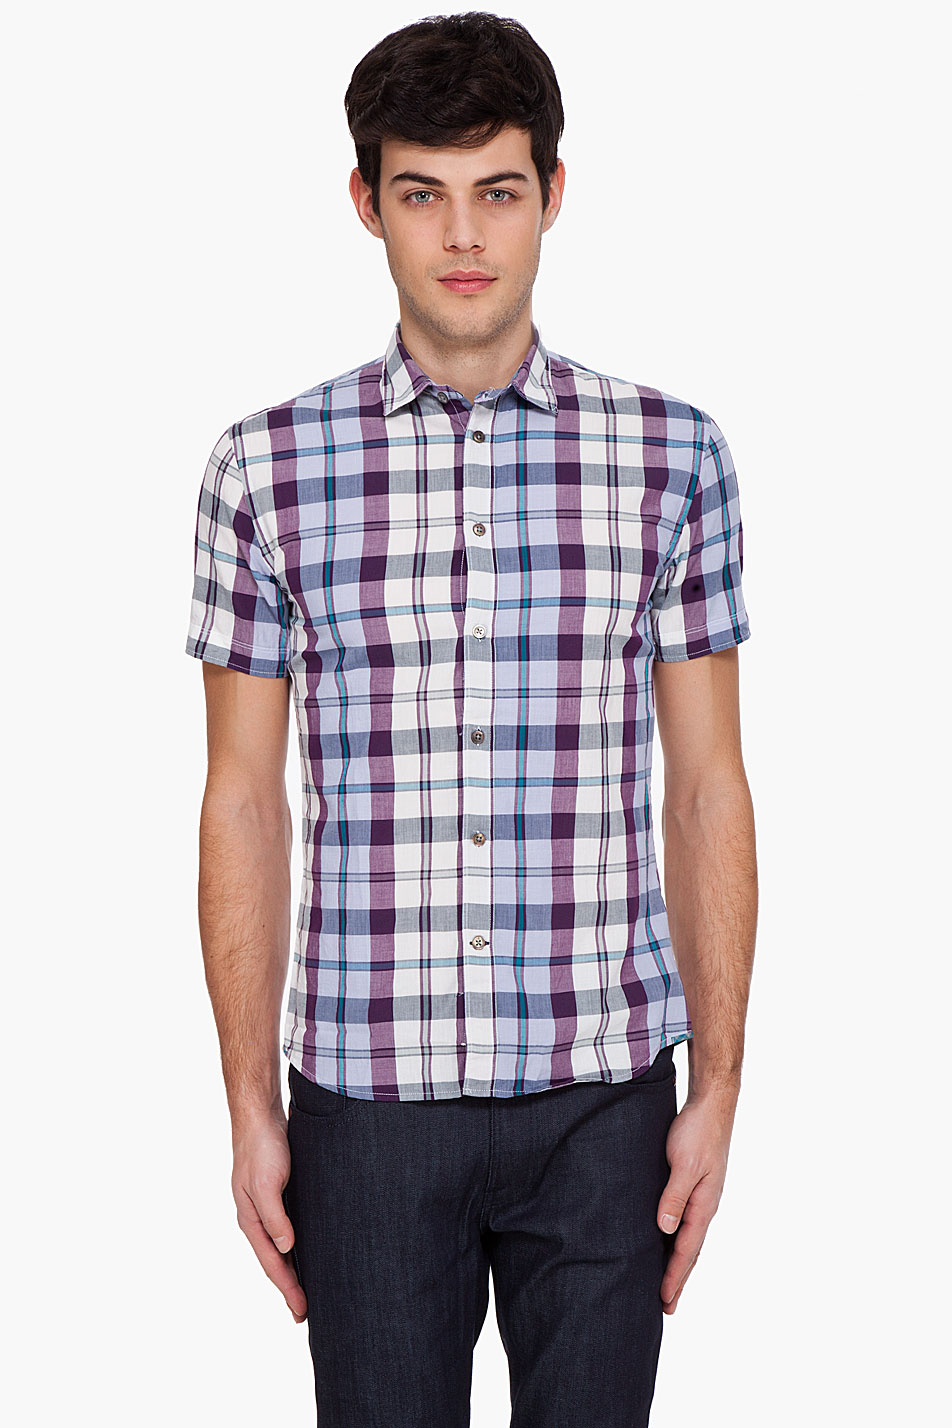 Lyst - Paul Smith Tailored Fit Plaid Shirt in Purple for Men